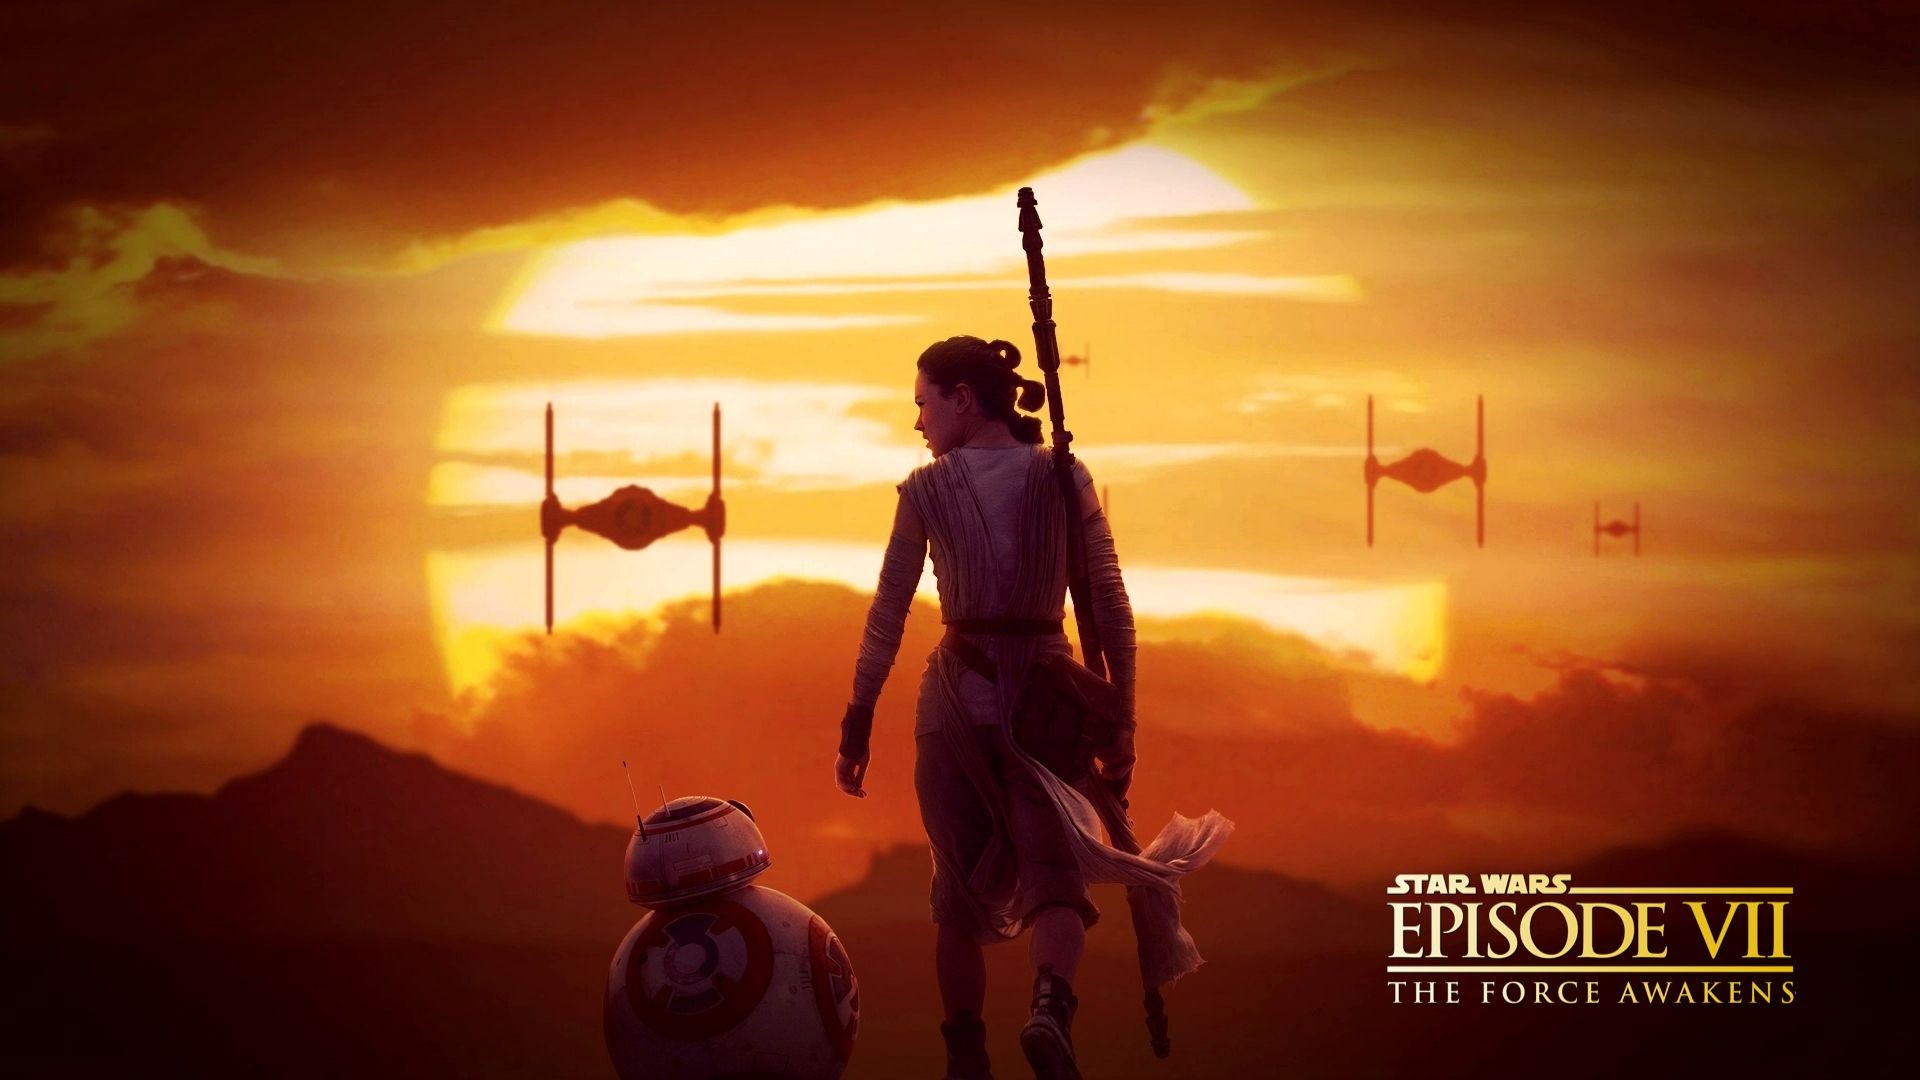 General 1920x1080 Star Wars: The Force Awakens BB-8 Star Wars Daisy Ridley Sun Rey (Star Wars) sky Star Wars Droids Star Wars Heroes science fiction science fiction women movies